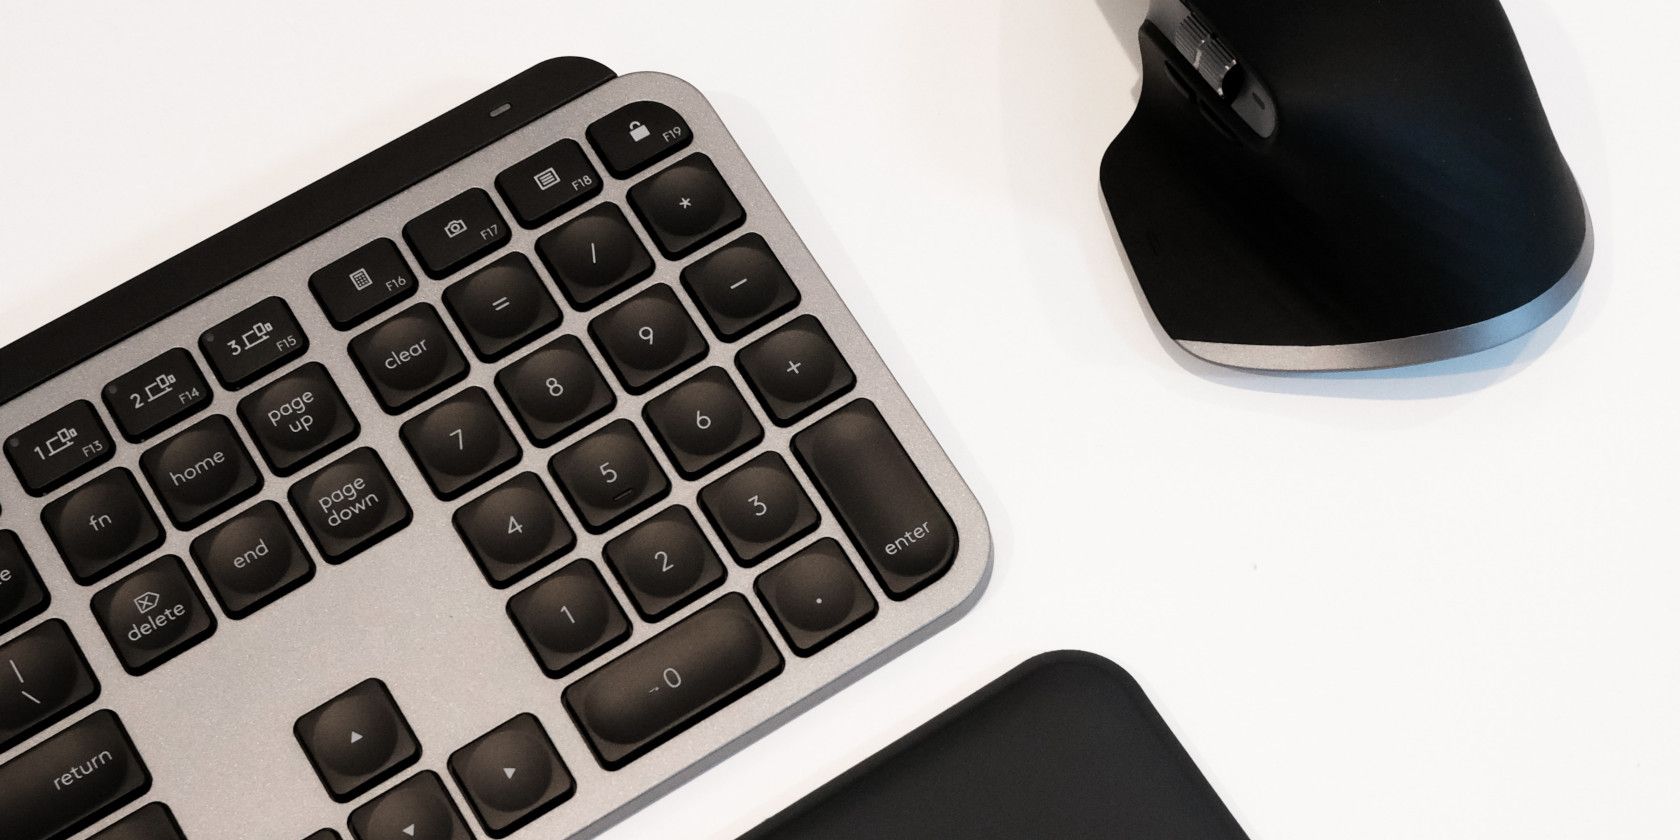 A slick keyboard and wireless mouse